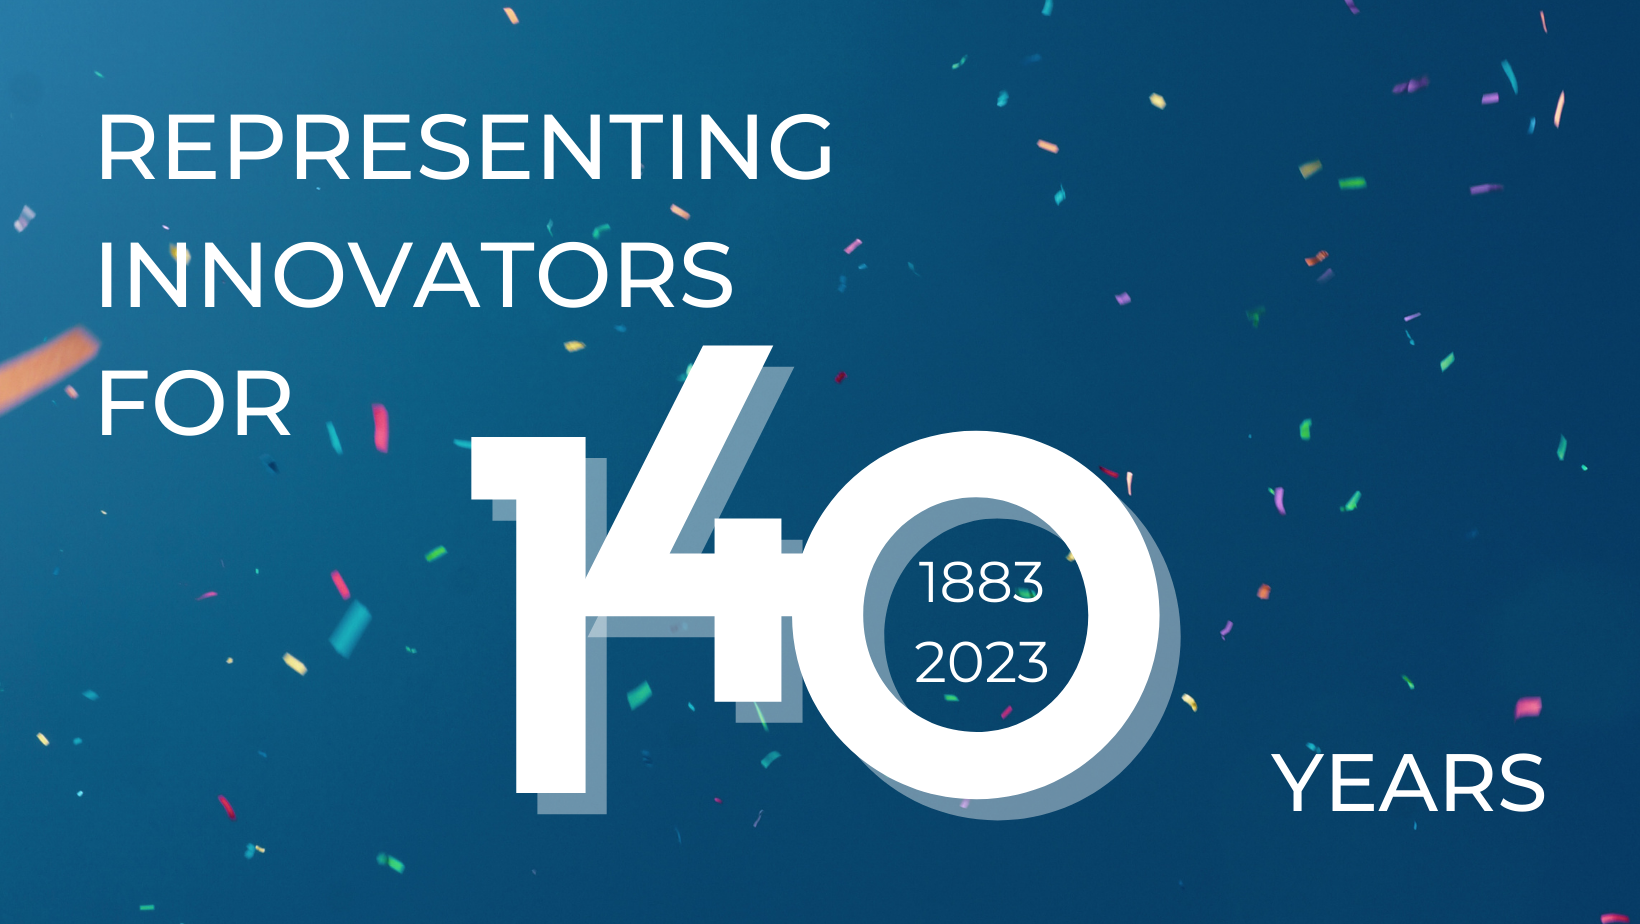 Firm's tagline, "Representing Innovators for 140 Years"